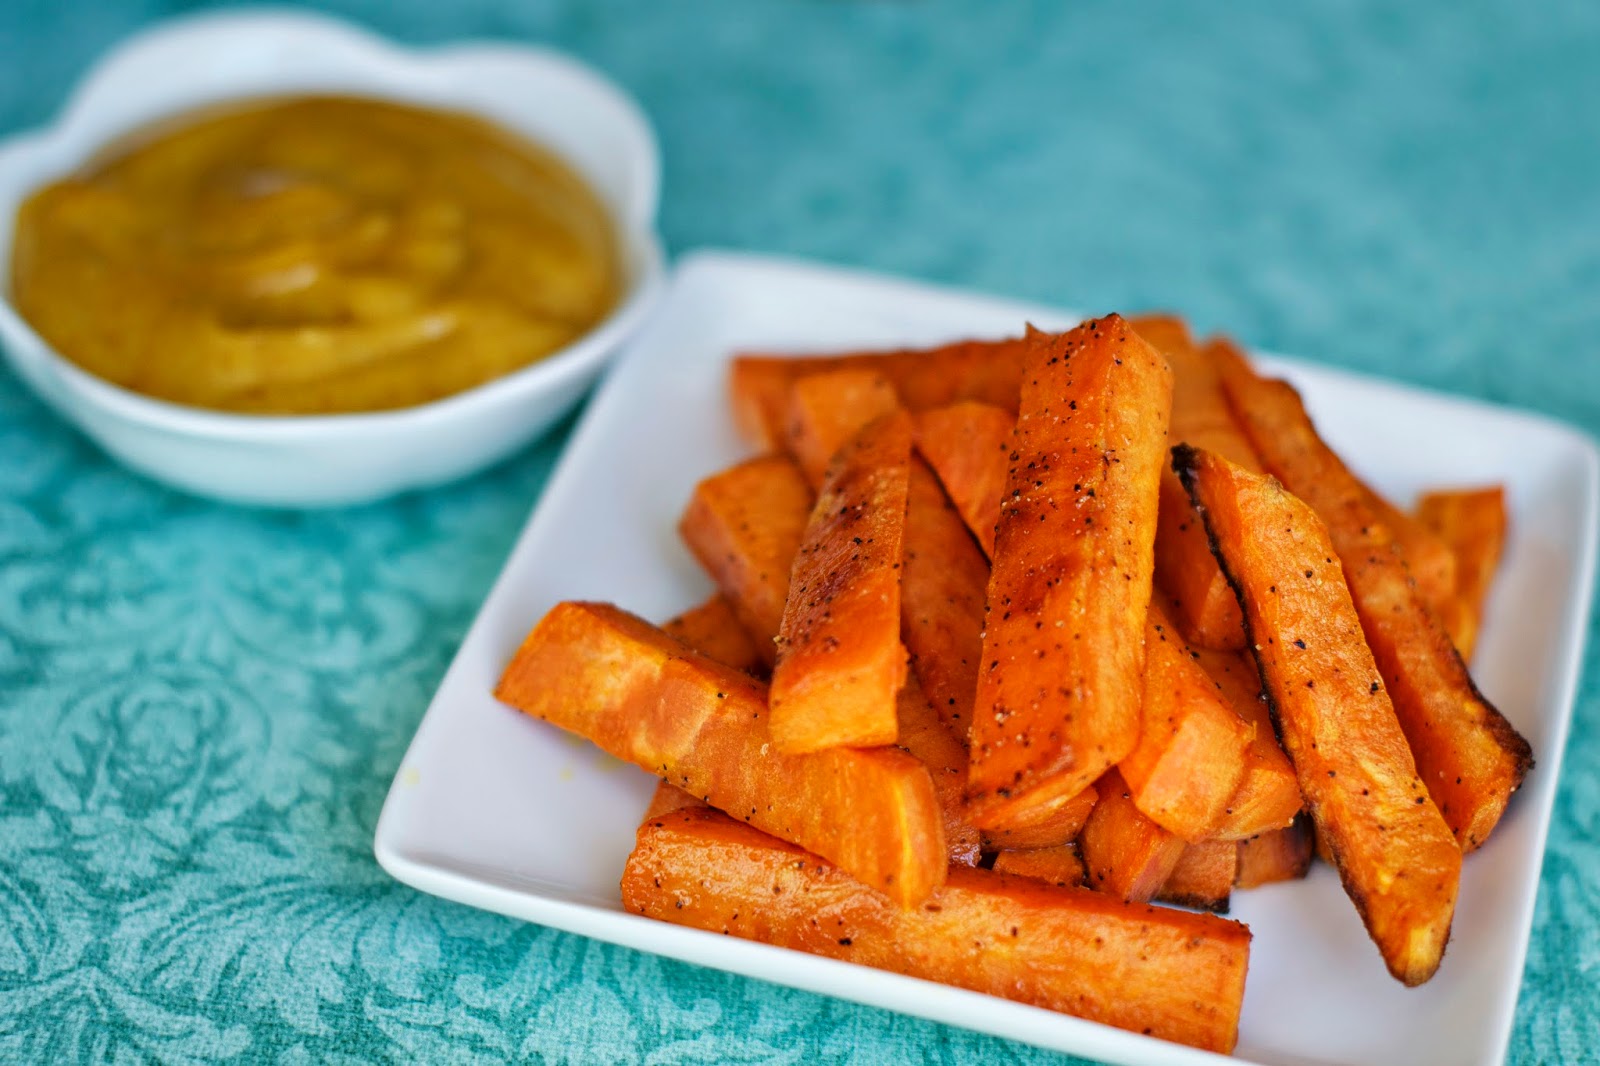 Healthy, Tasty, & Simple Eating: Sweet Potato Fries with Curried Dip